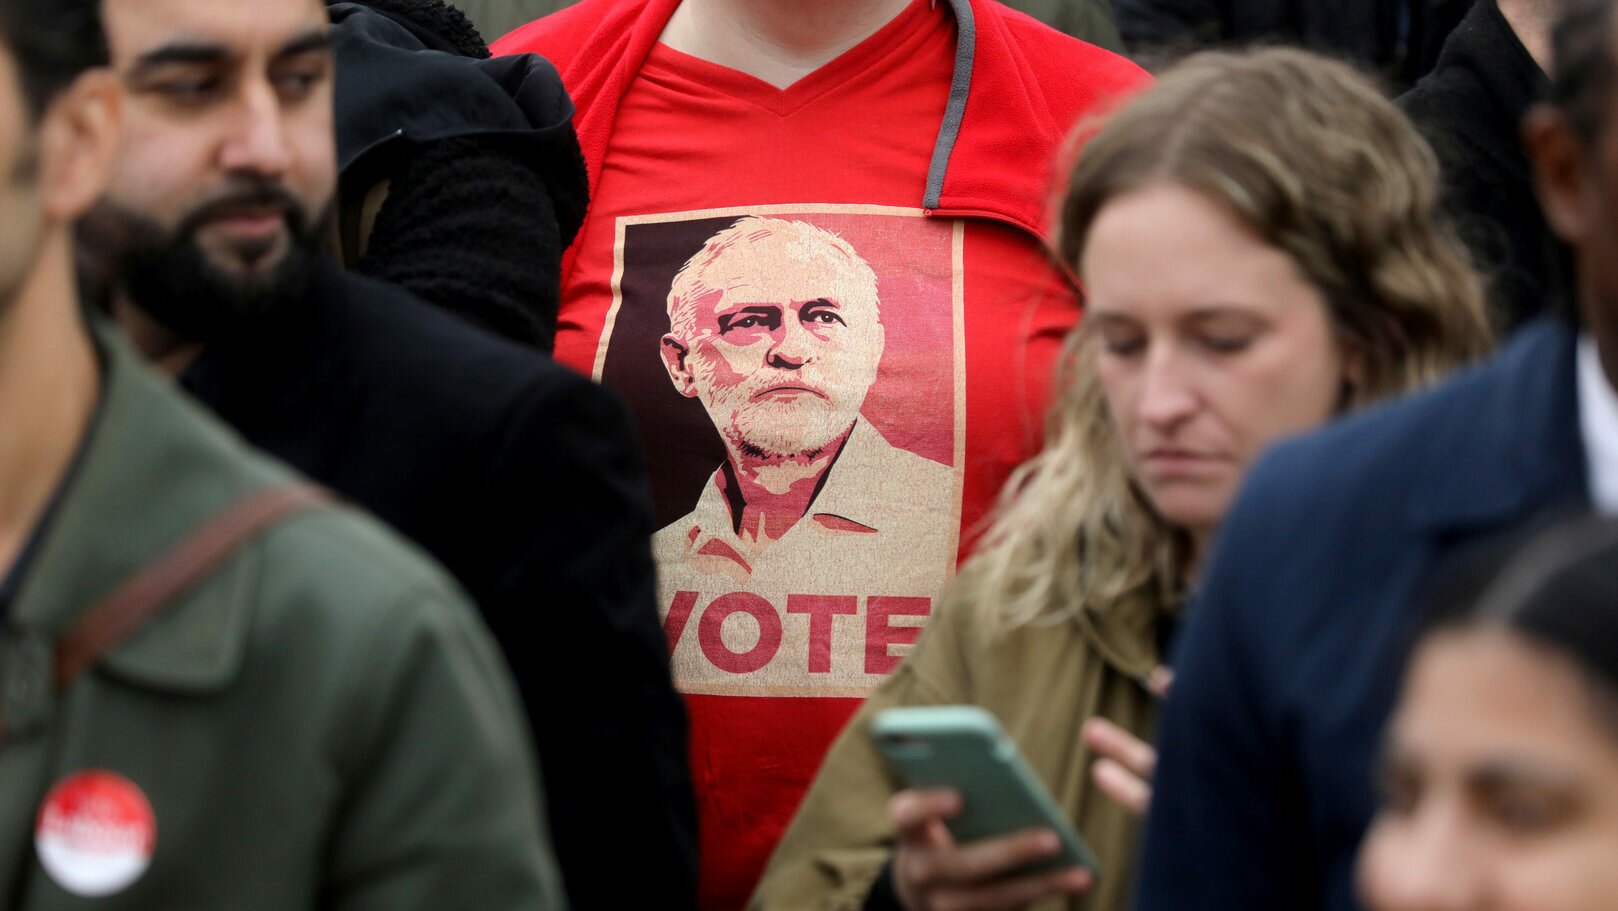 Might Jeremy Corbyn want an election even if he lost? - InFacts